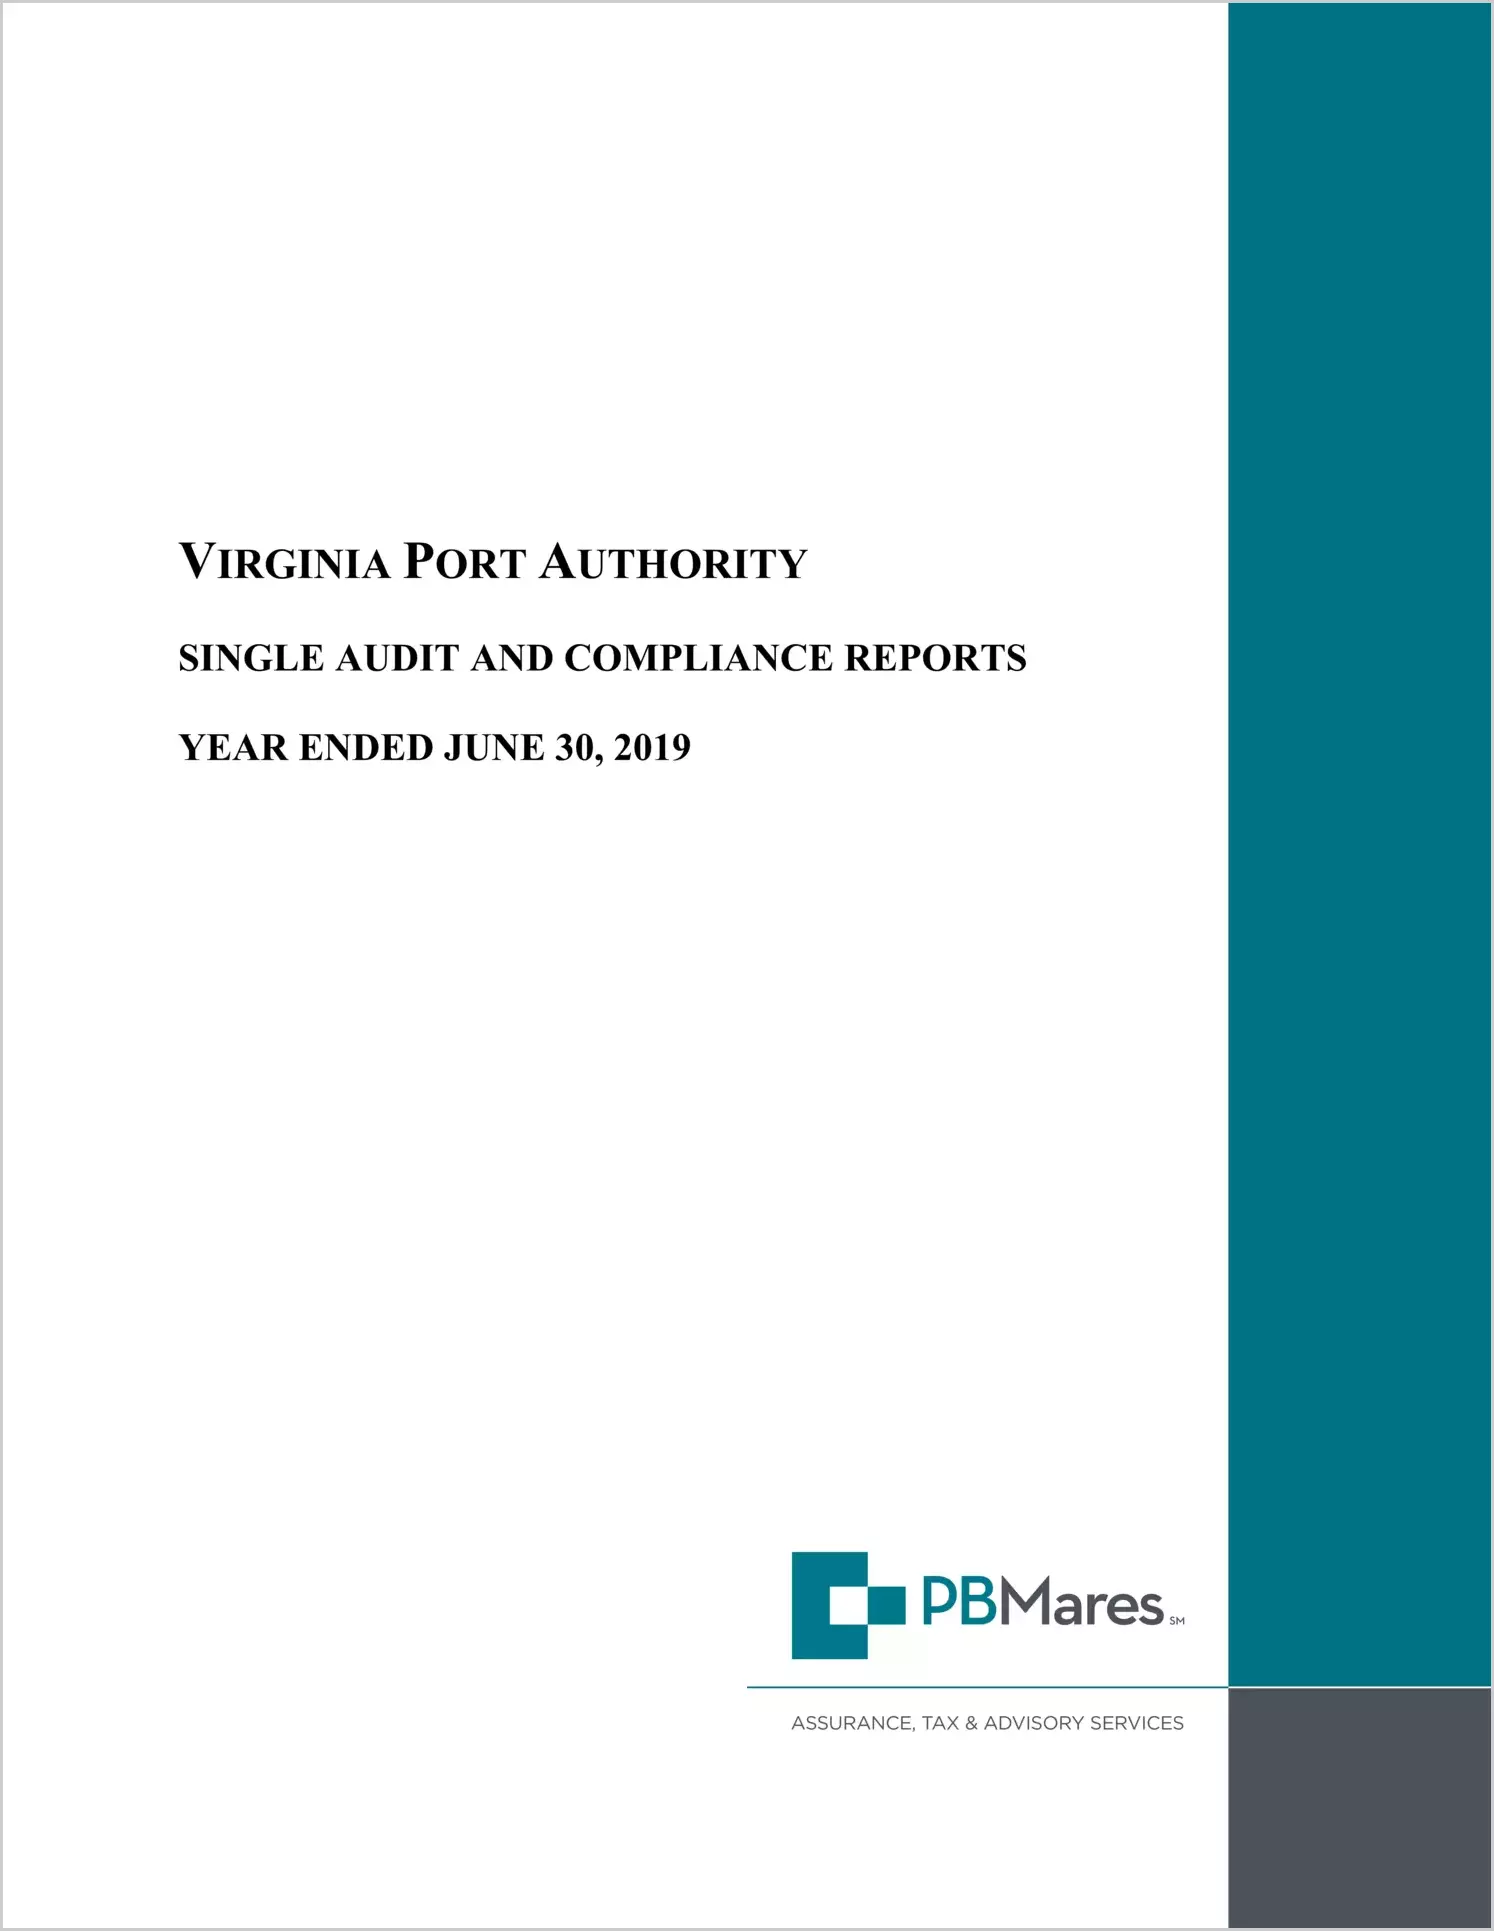 Virginia Port Authority for the year ended June 30, 2019